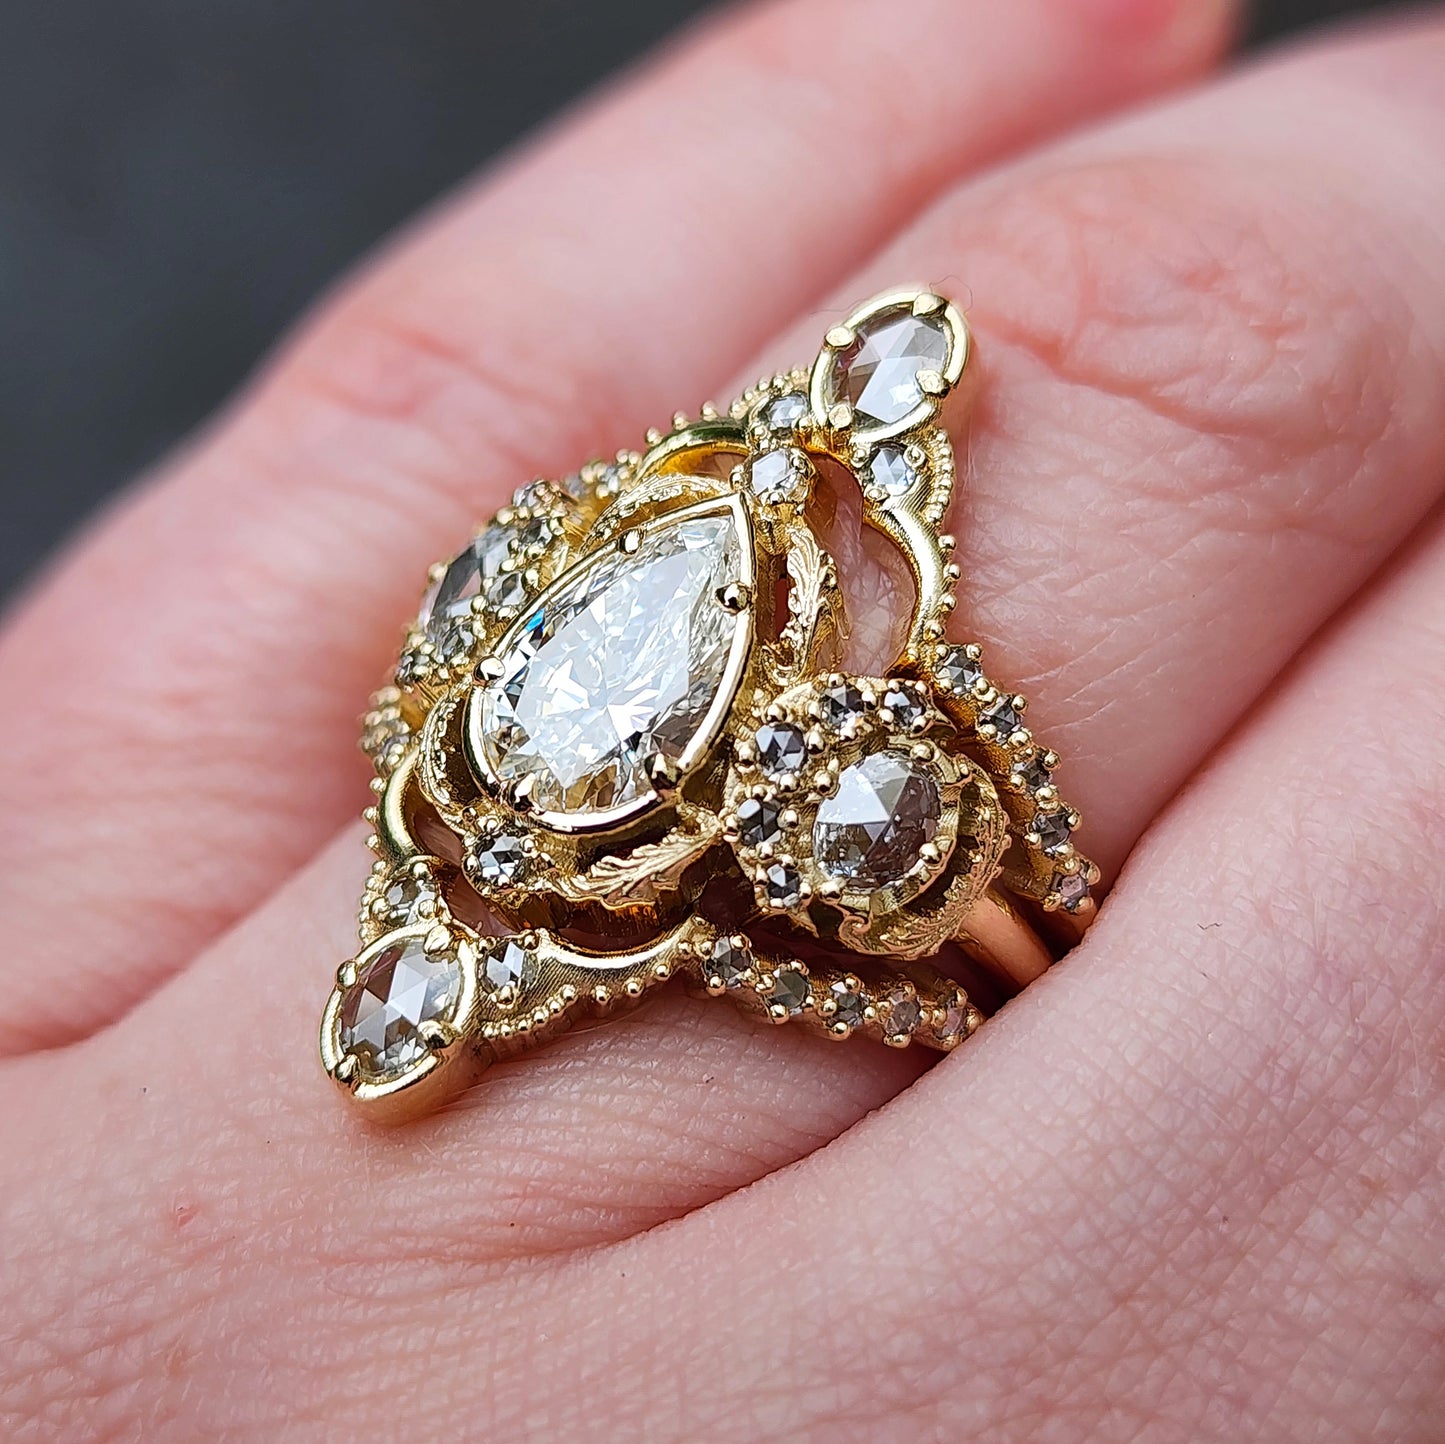 Goodnight Moon Ring with Rose Cut Diamonds and Fancy Gold Scrollwork - Fantasy Filigree 14k Gold Handmade Ring with Moissanite or Lab Diamond Pear Center Stone